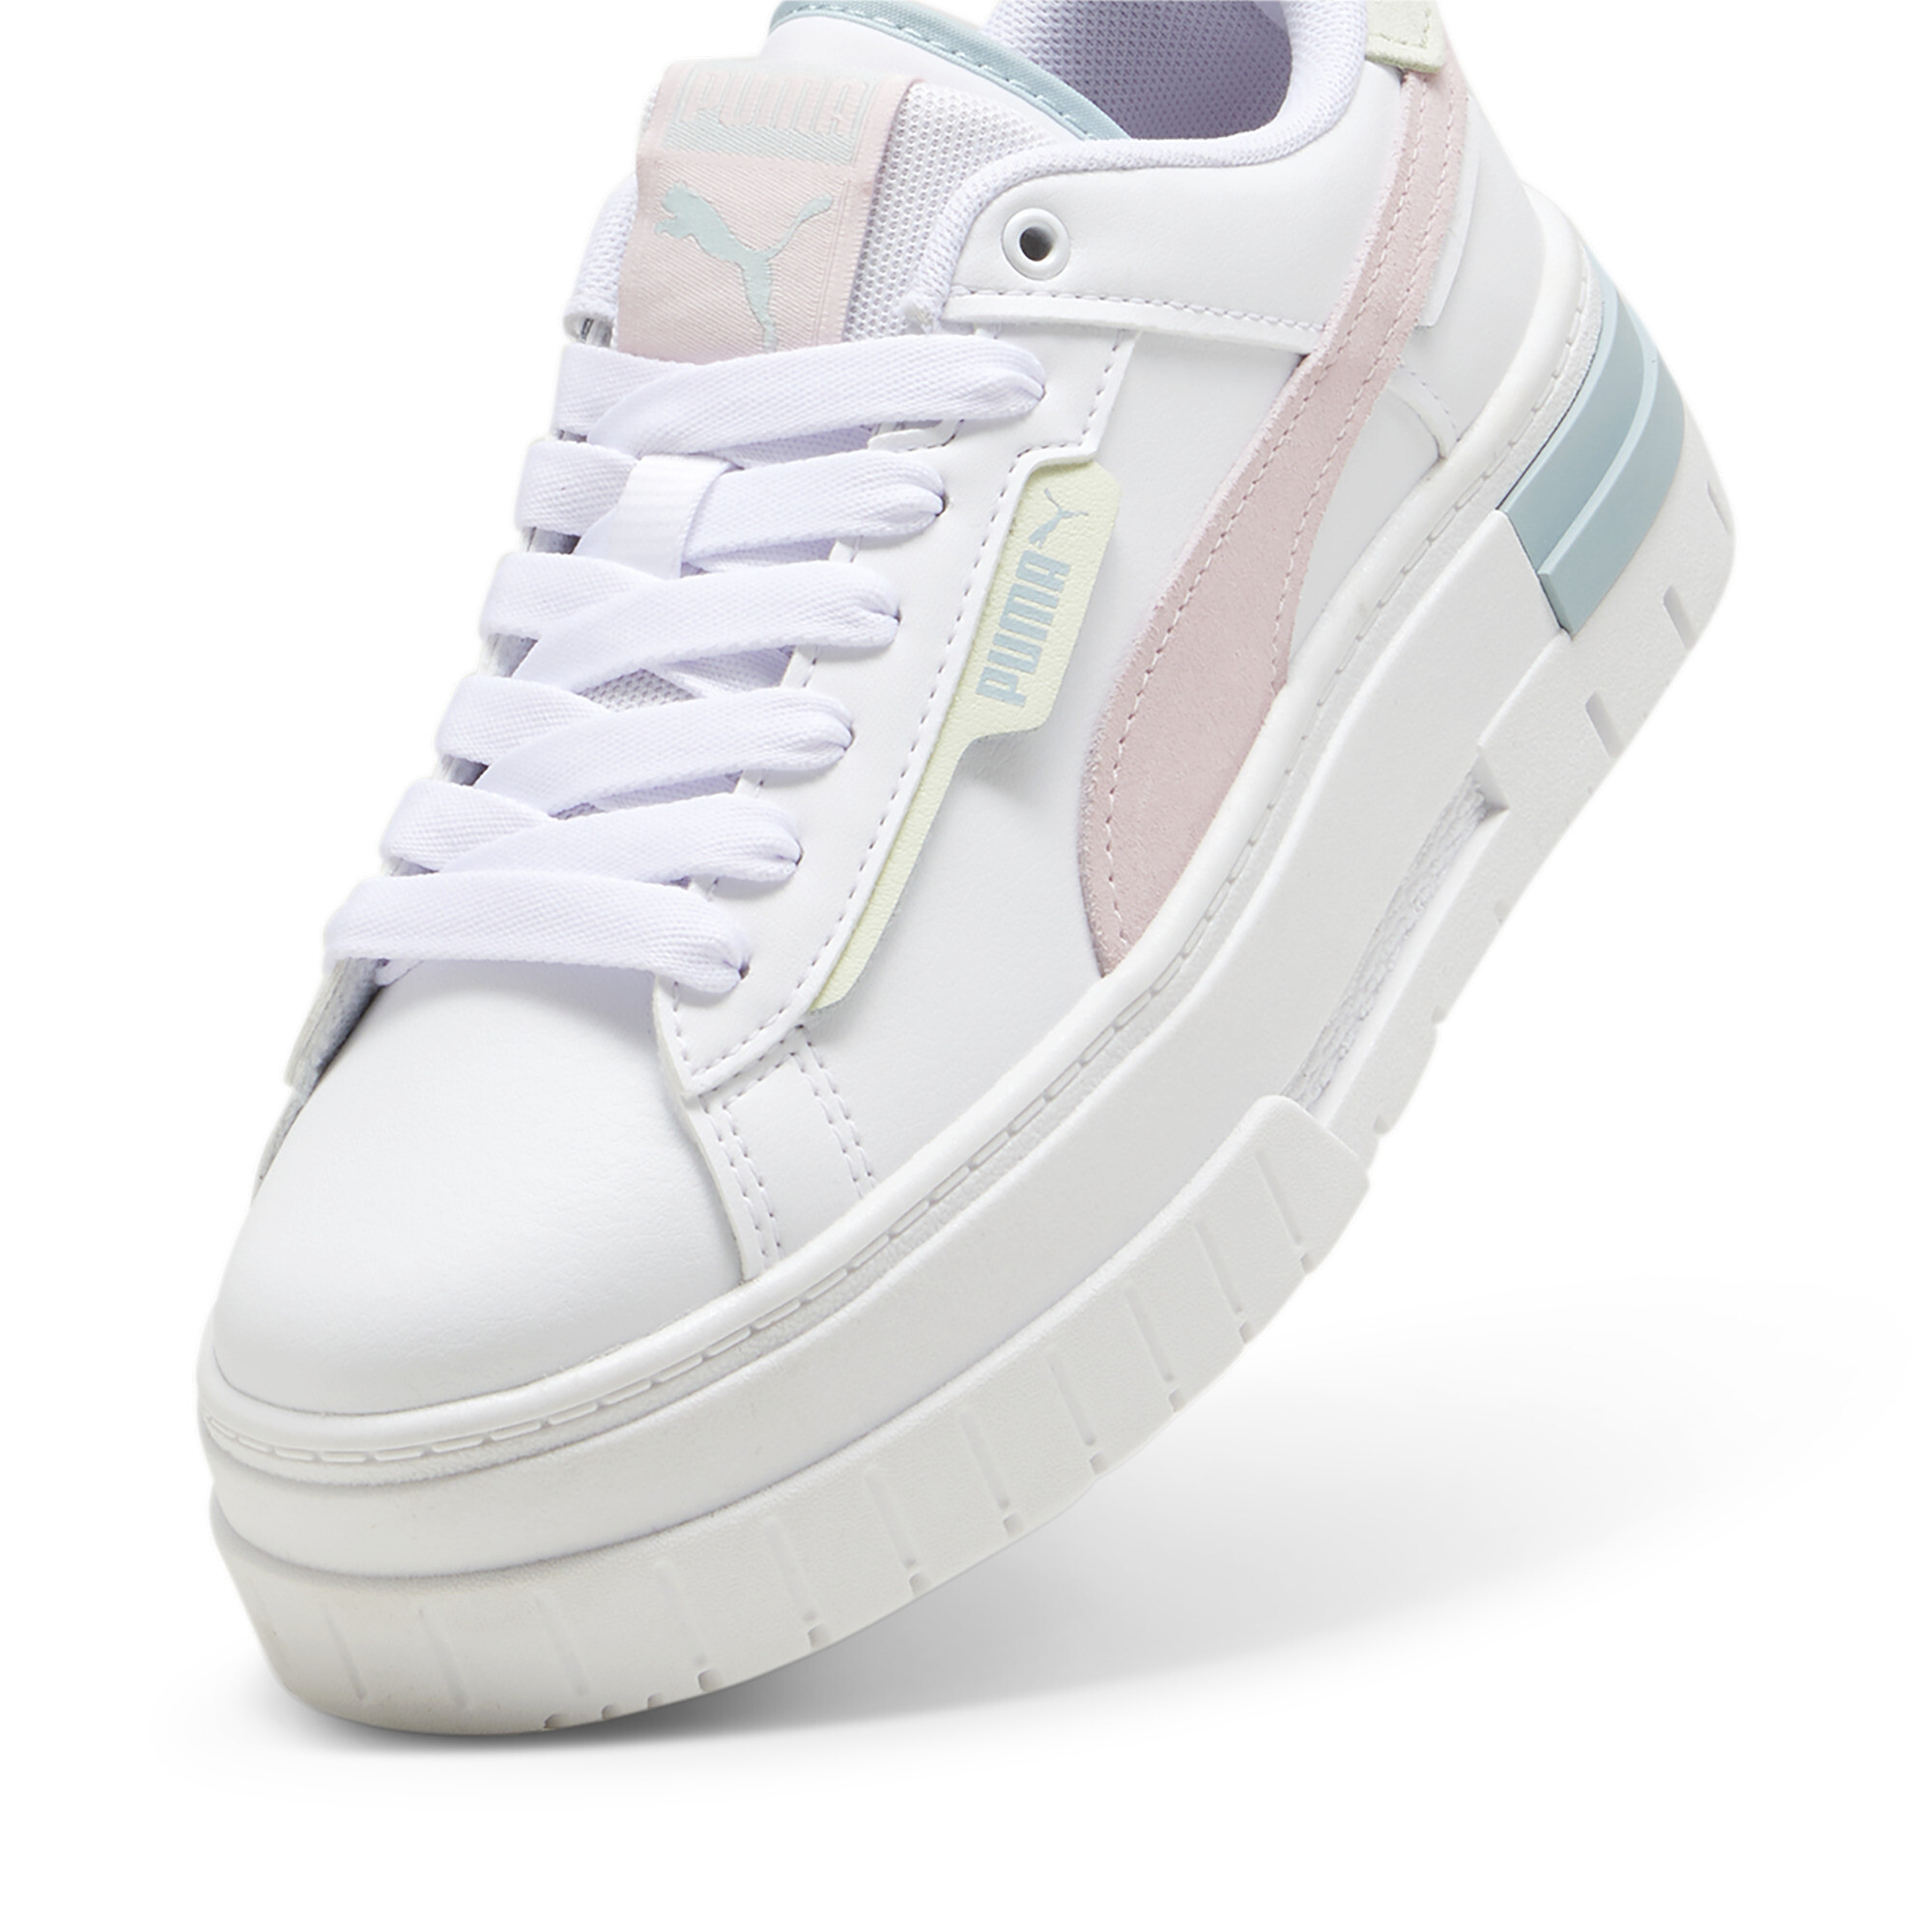 Women's Puma Mayze Crashed Youth Sneakers, White, Size 38.5, Shoes